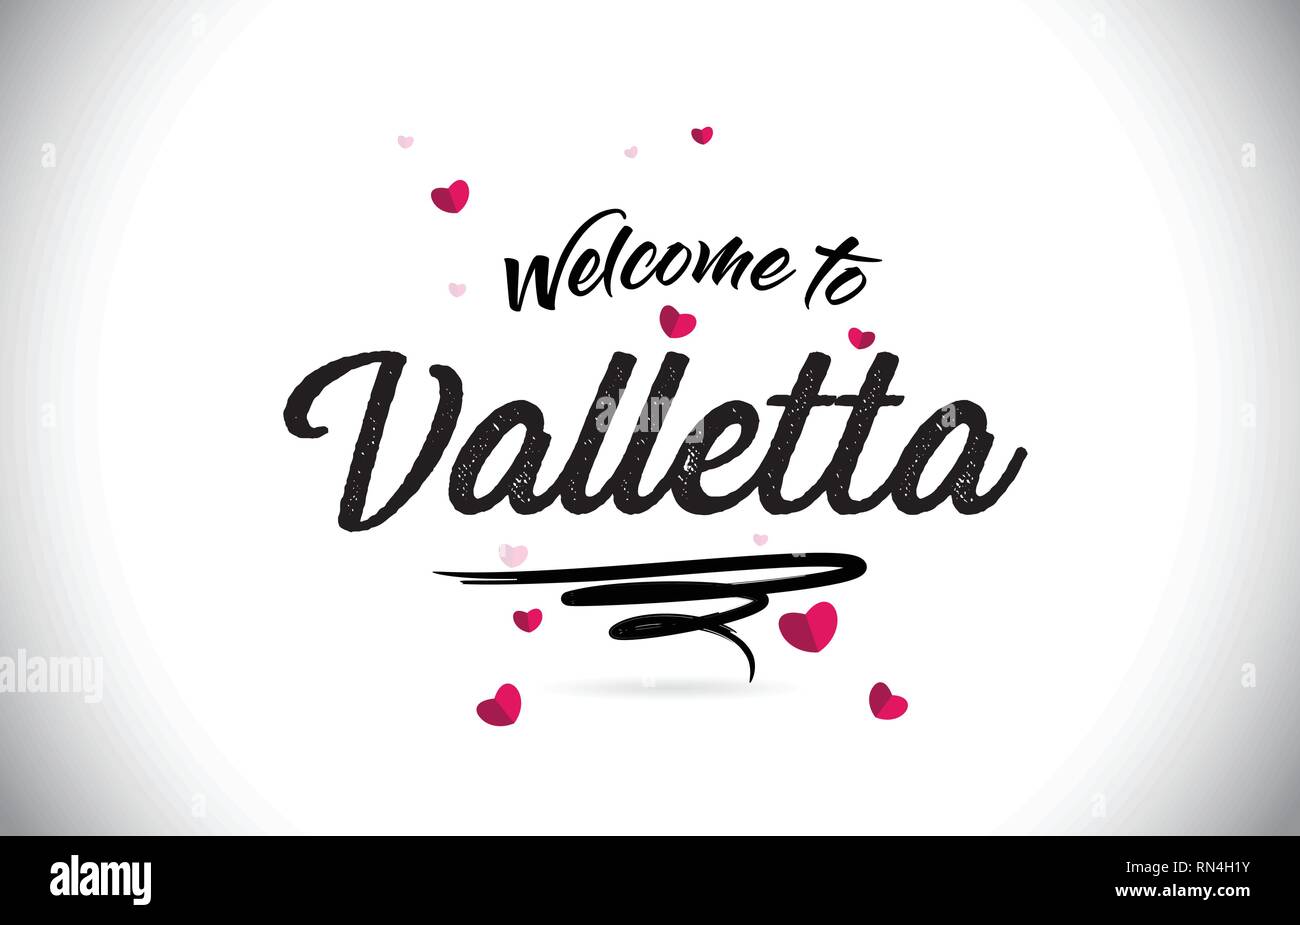 Valletta Welcome To Word Text with Handwritten Font and Pink Heart Shape Design Vector Illustration. Stock Vector